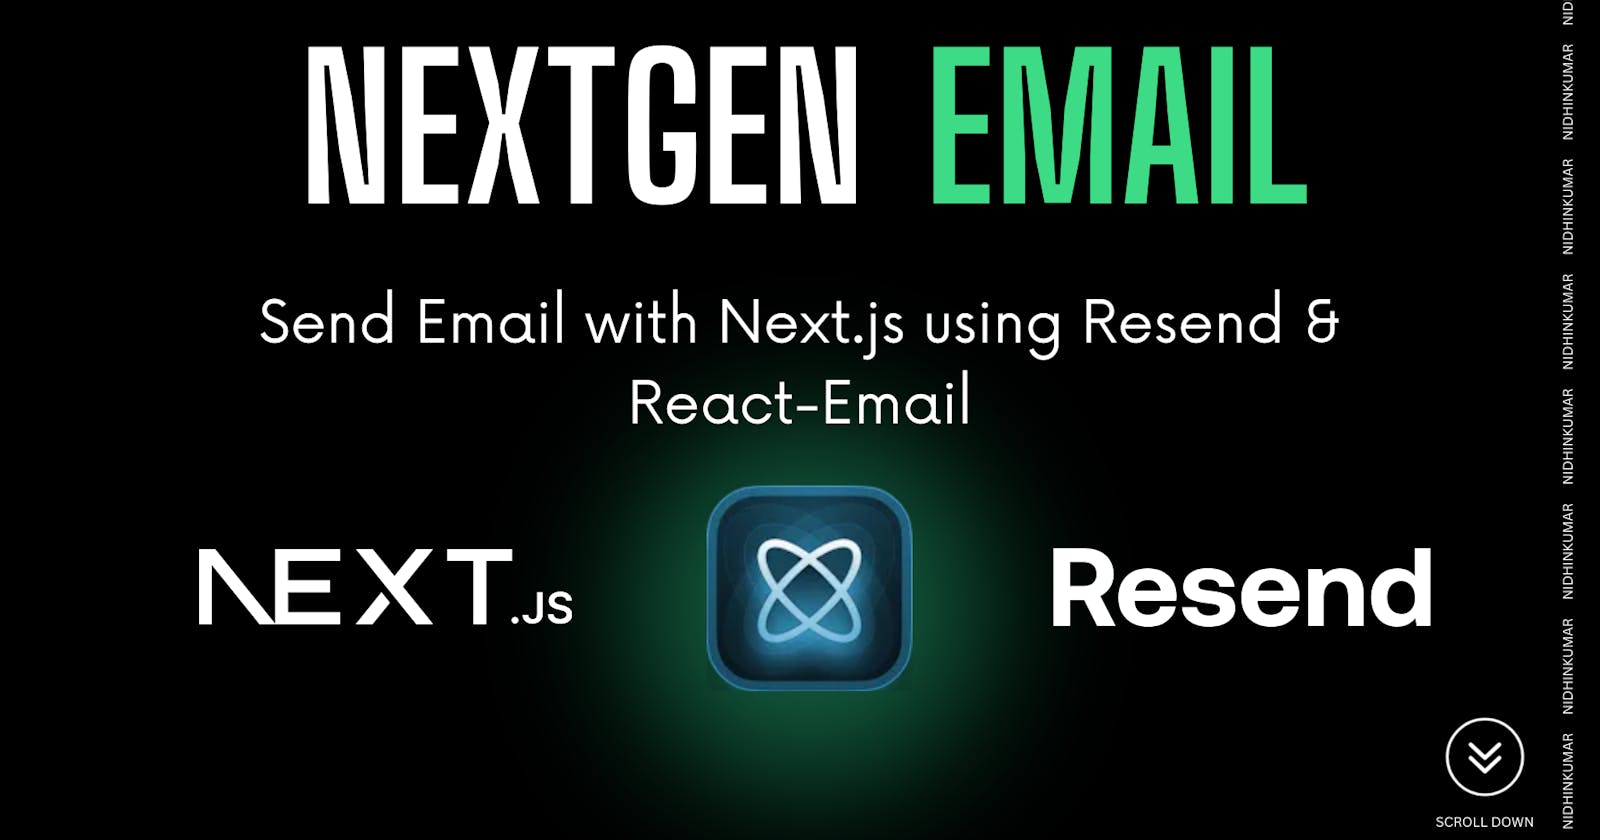 Send Email with Next.js, Resend and React-Email